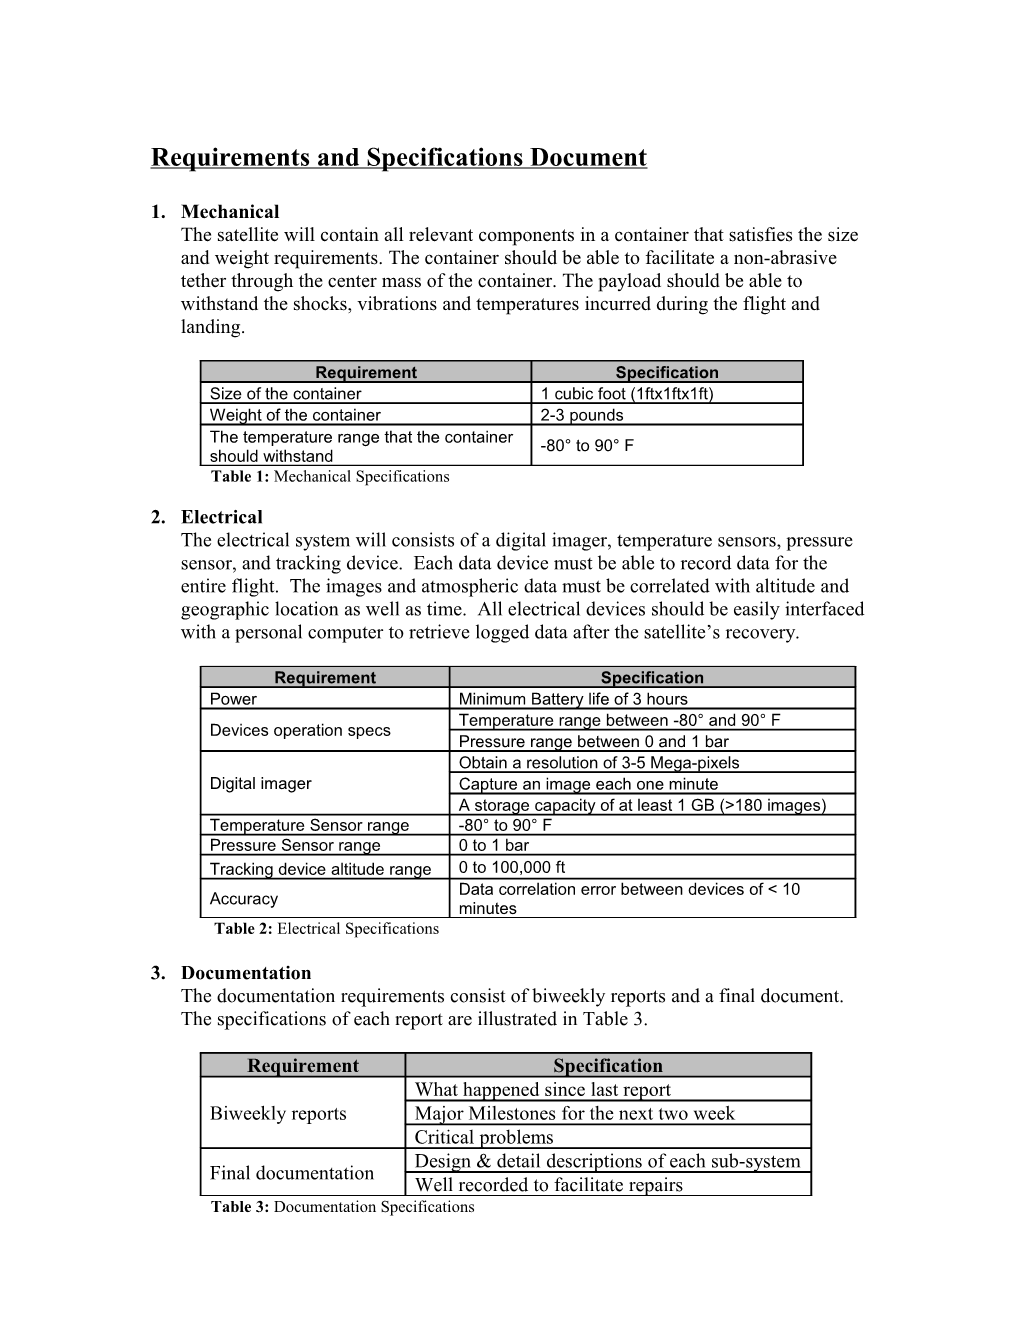 Requirements and Specifications Document